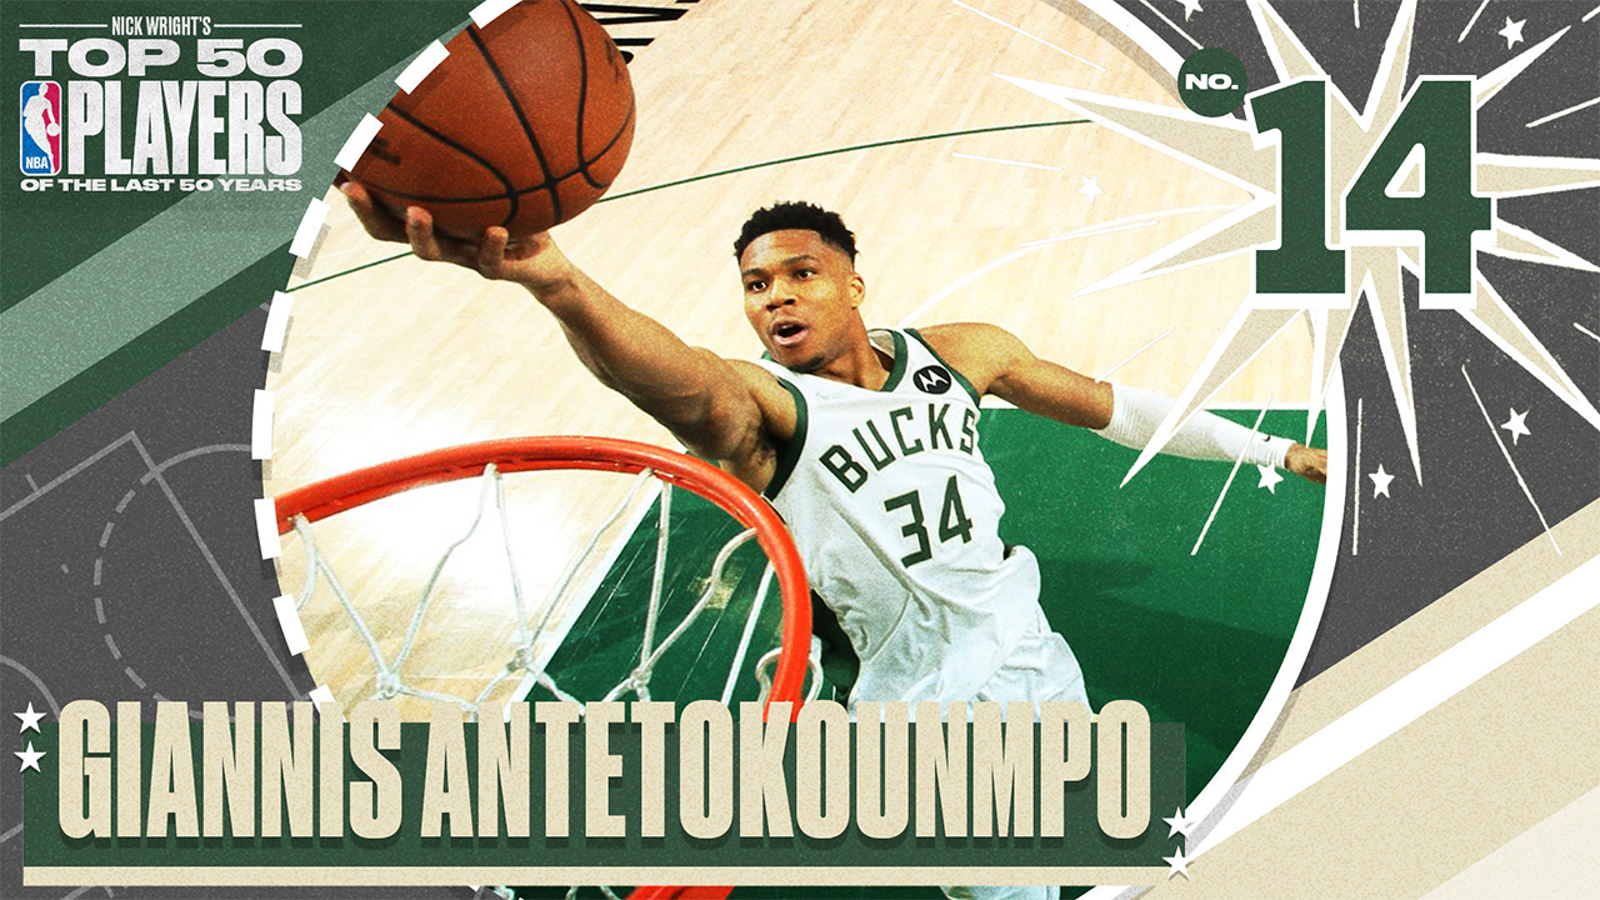 Giannis Antetokounmpo is No. 14 on Nick Wright's Top 50 NBA Players of the Last 50 Years